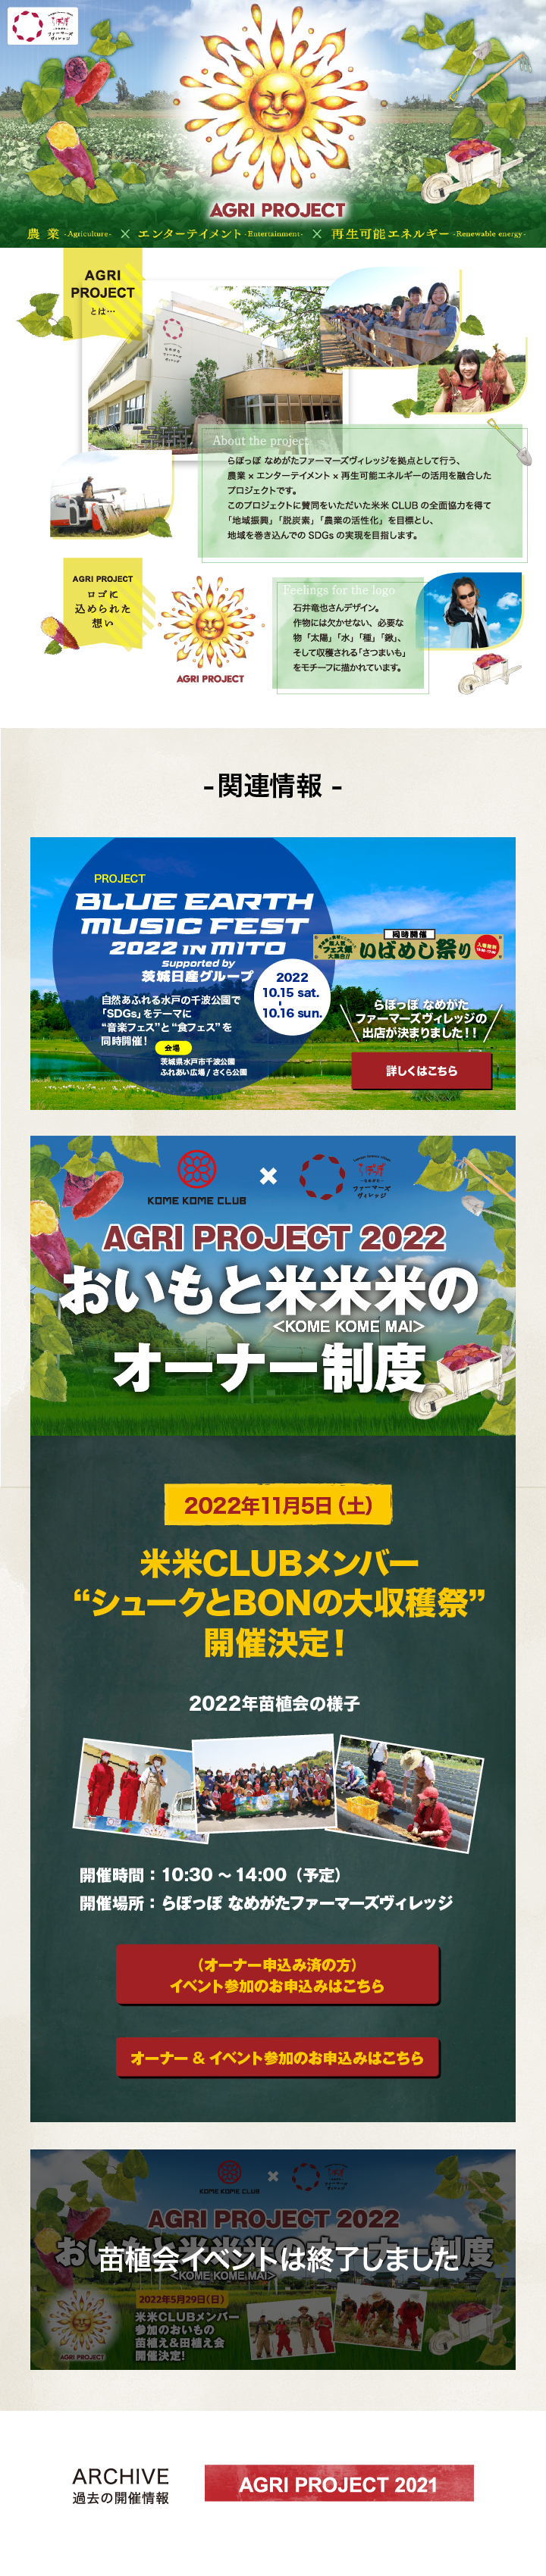 AGRI PROJECT